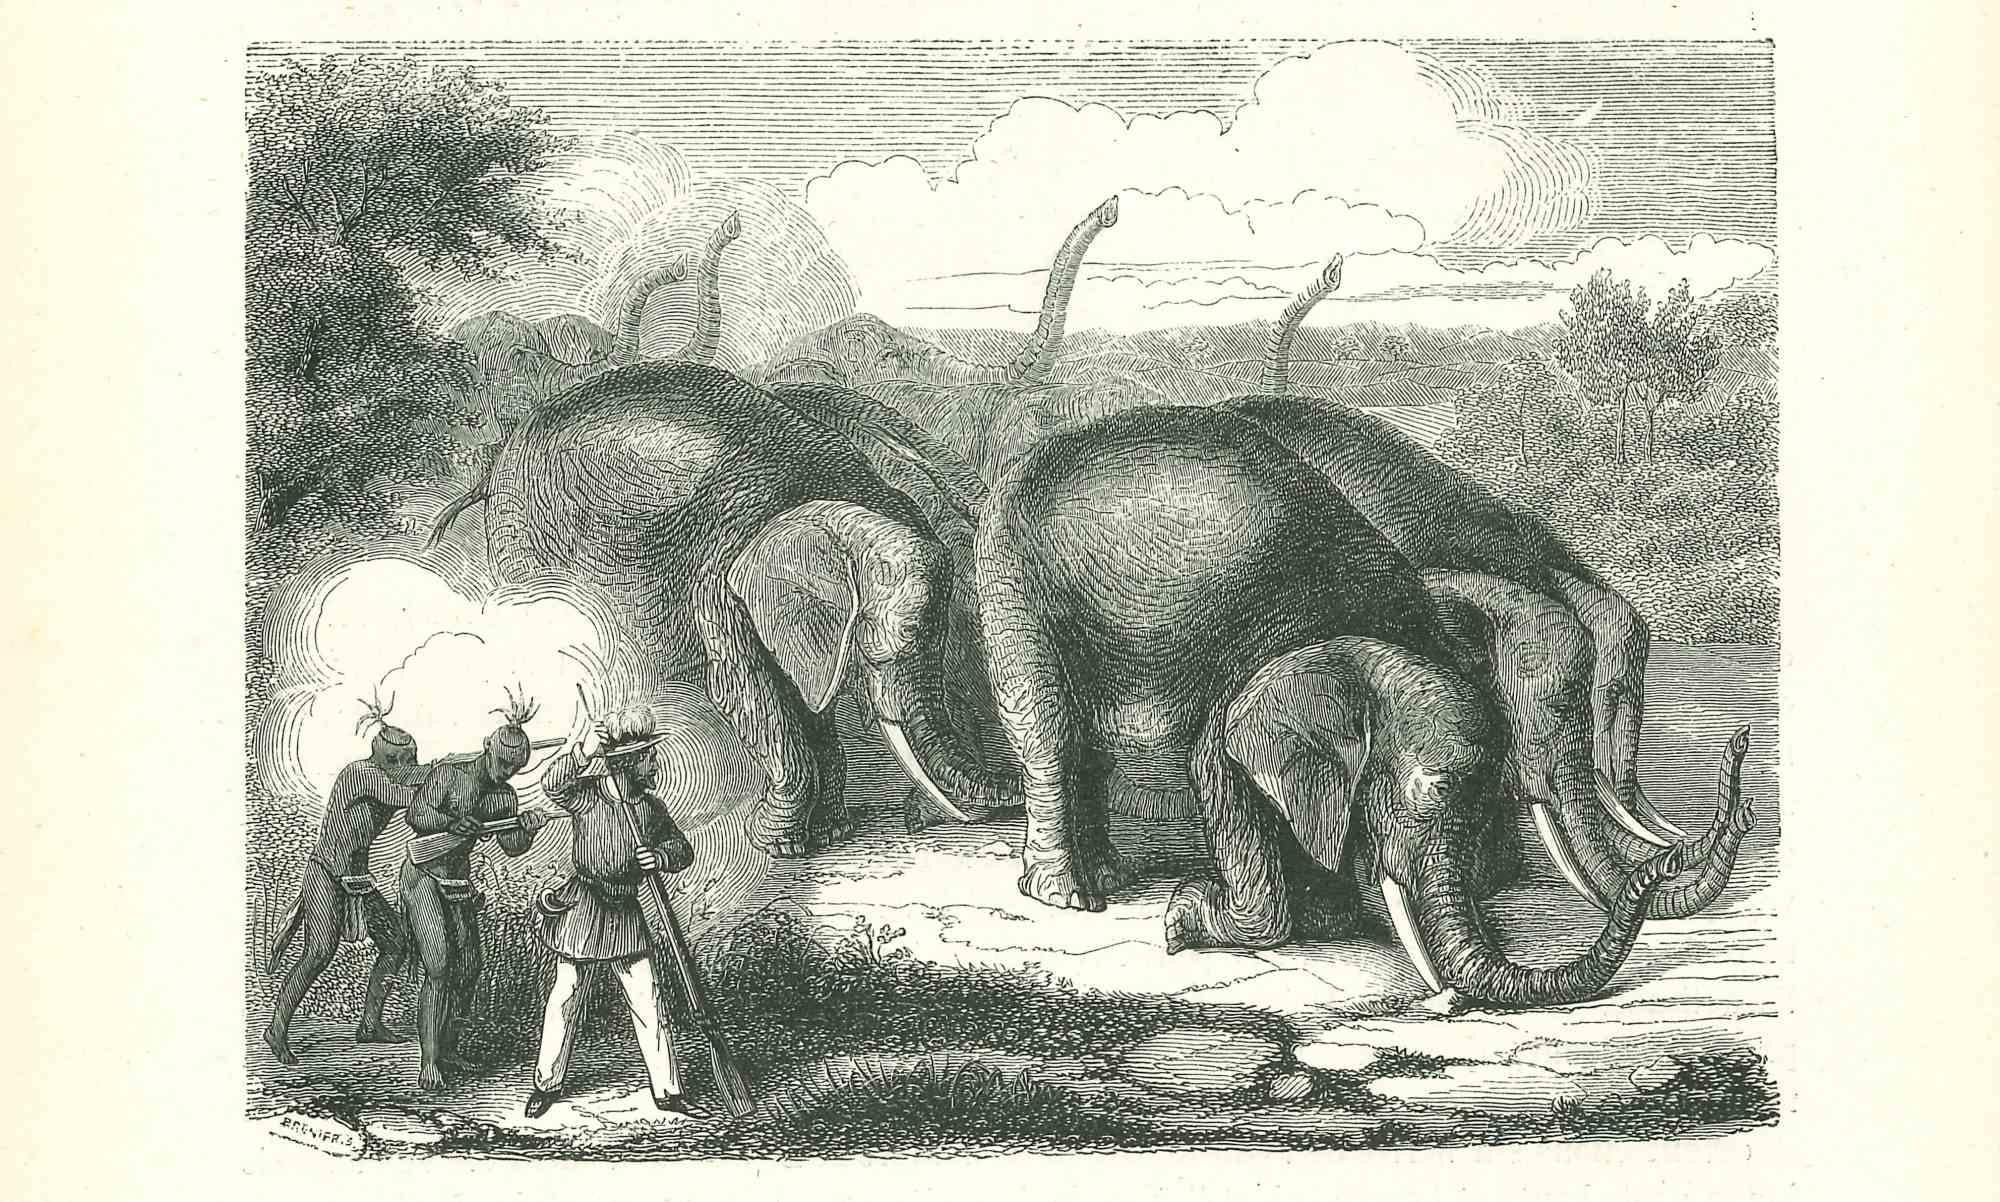 The Elephant Hunting - Original Lithograph by Paul Gervais - 1854